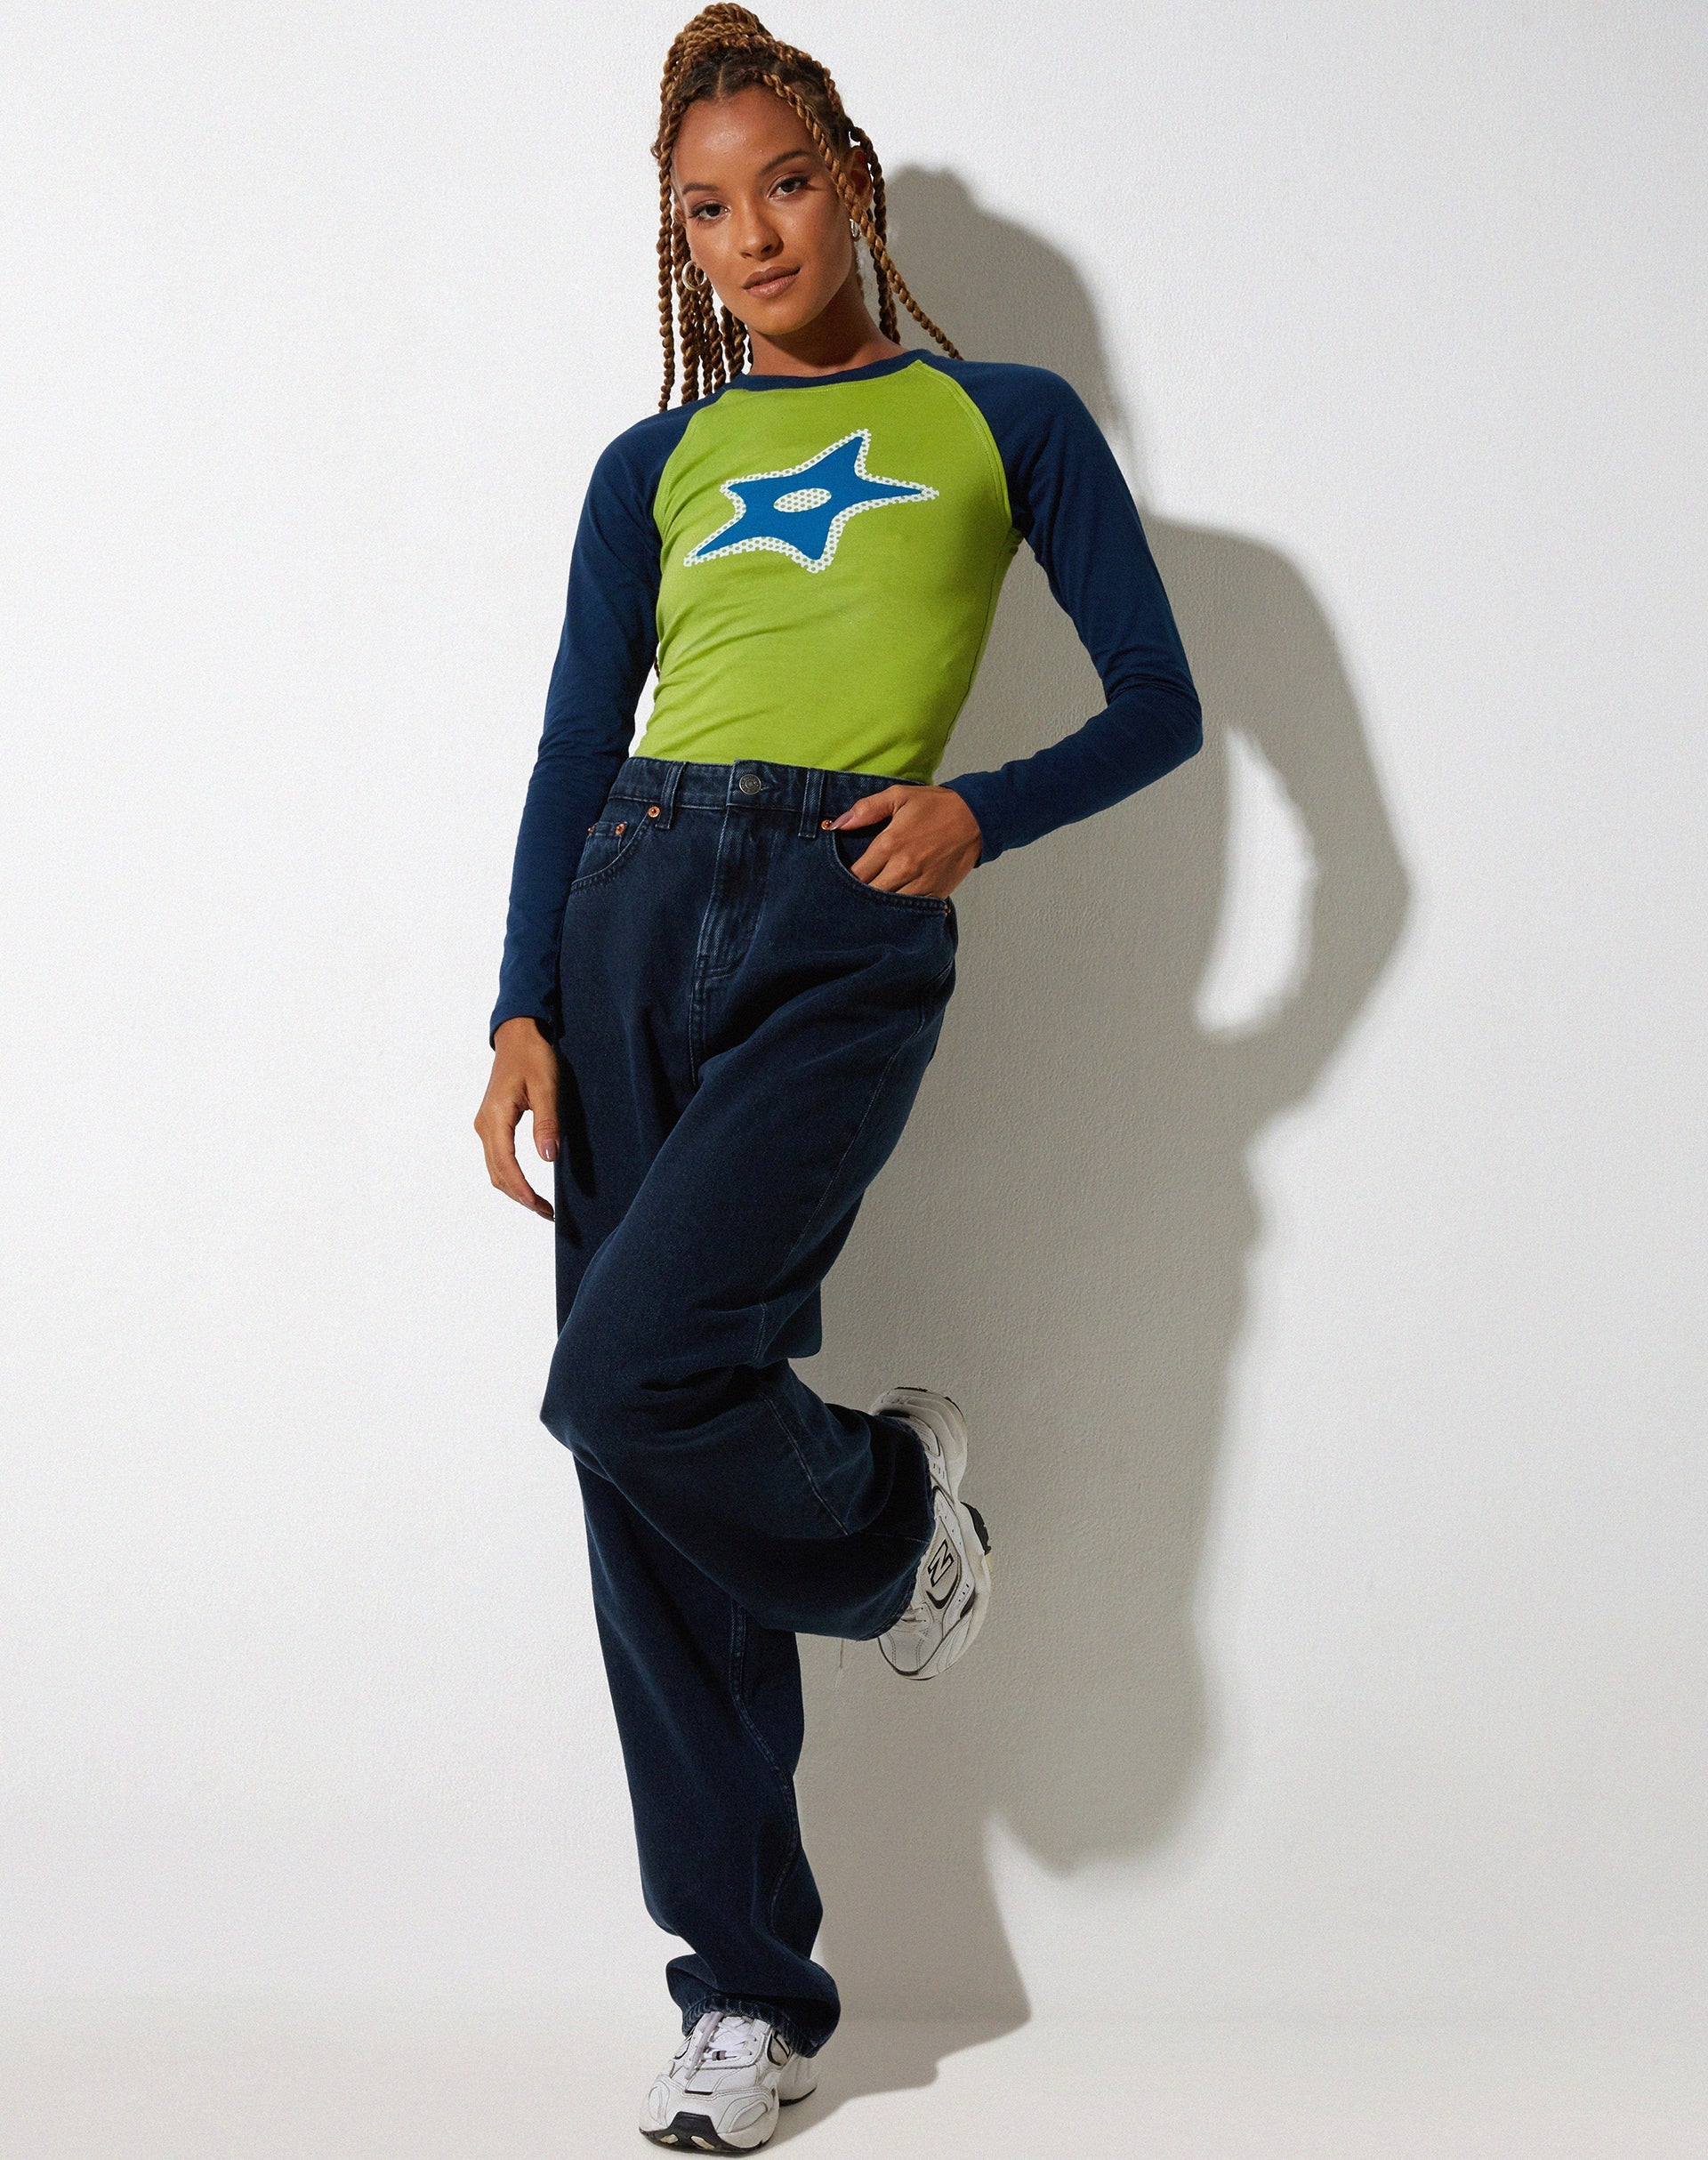 Image of Kyati Long Sleeve Crop Top in Wasabi Navy and Green